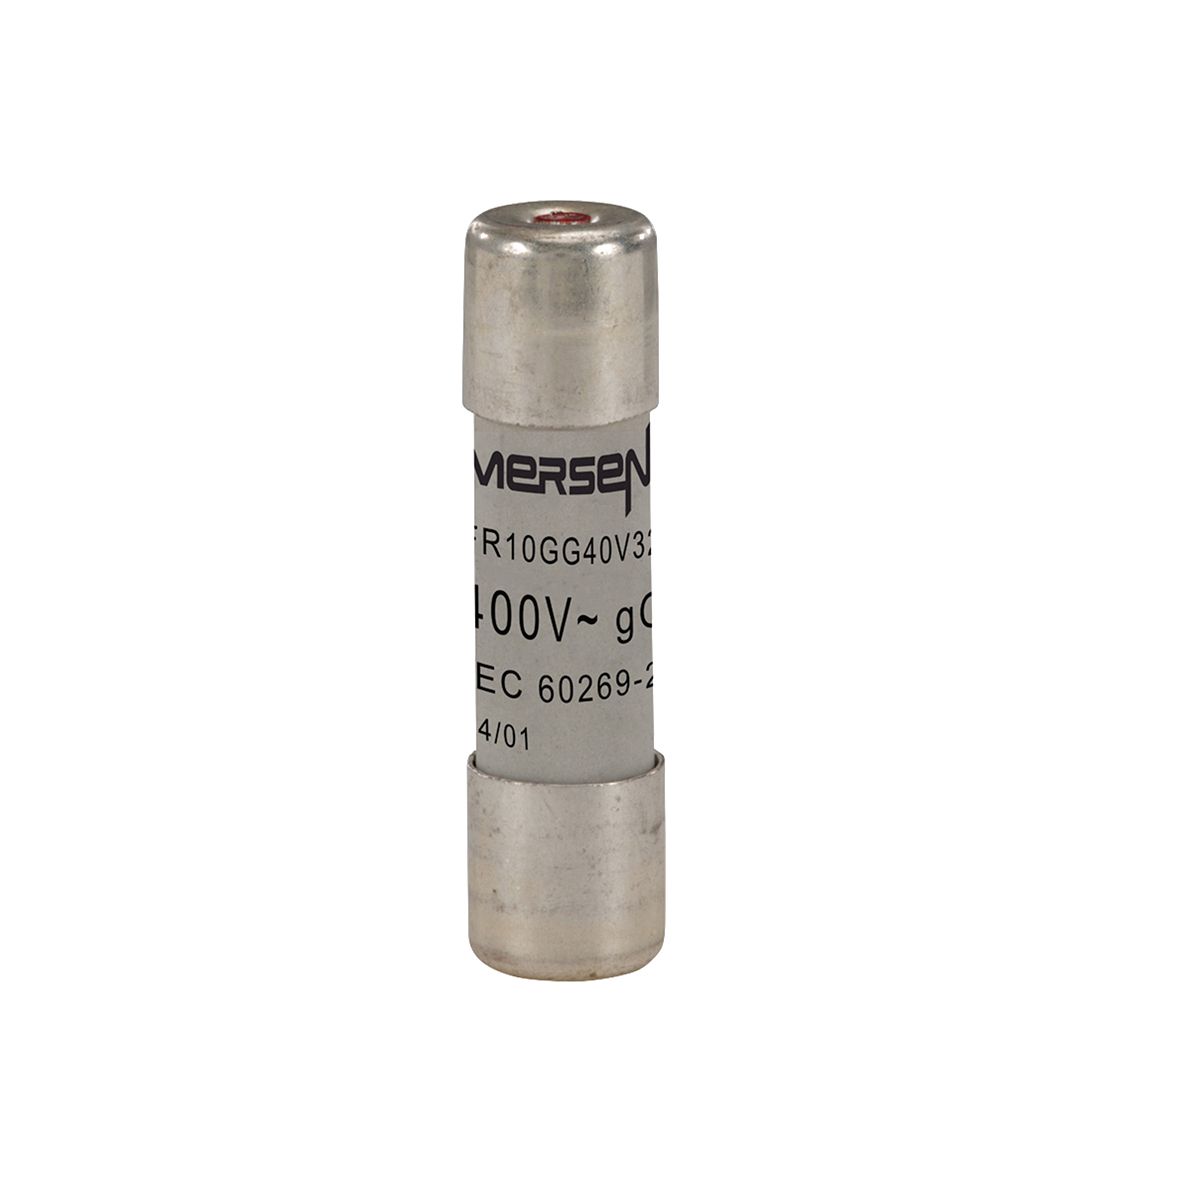 Z213600 - Cylindrical fuse-link gG 400VAC 10.3x38, 32A with indicator